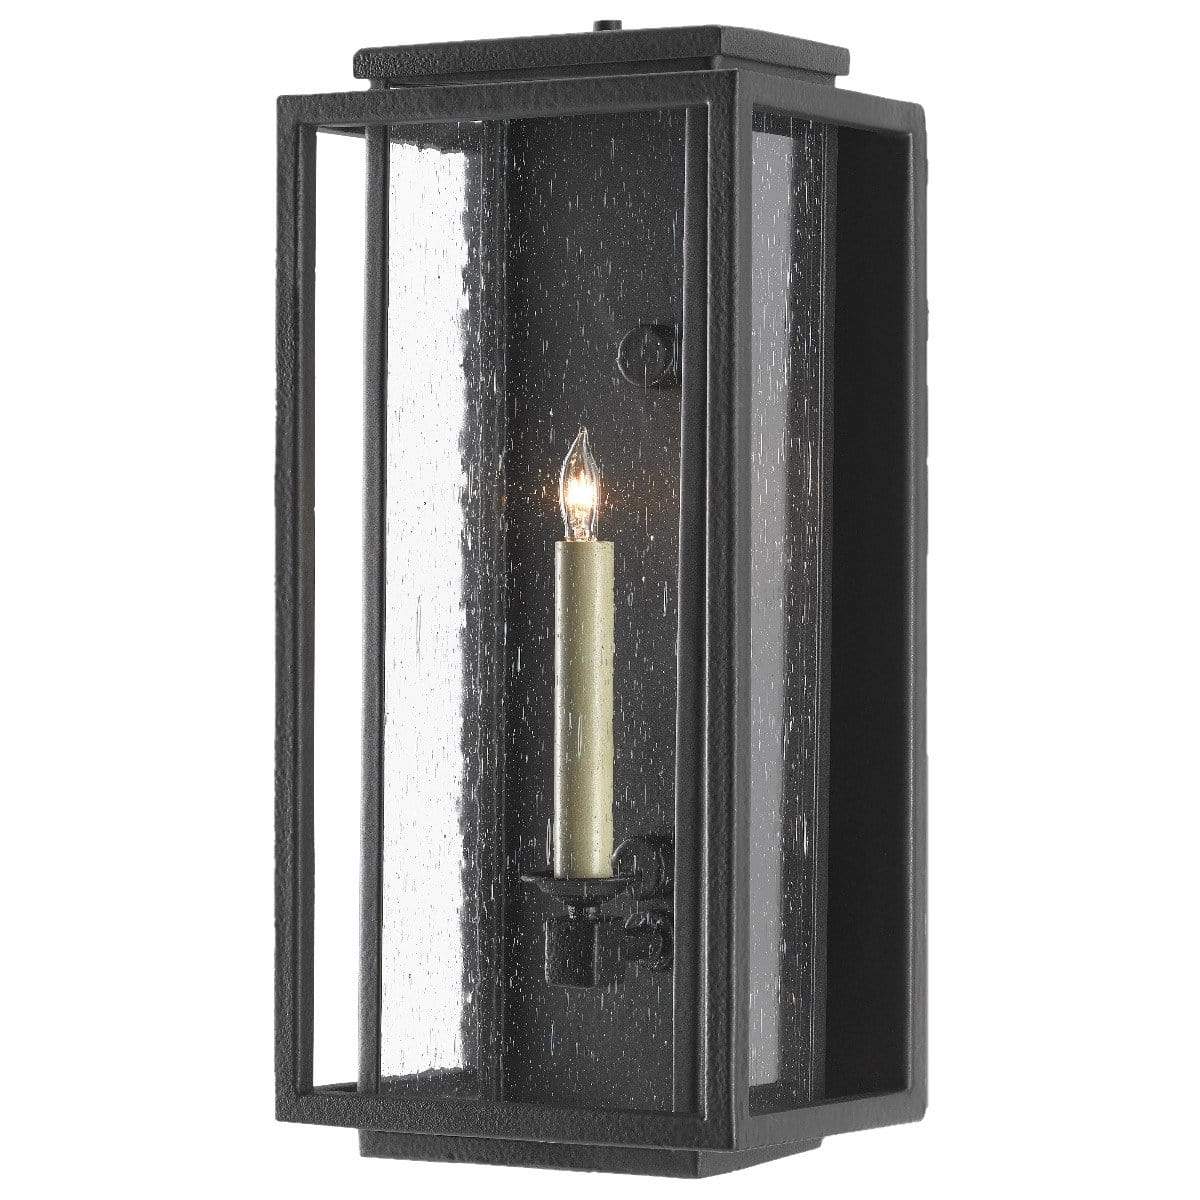 Currey and Company Wright Outdoor Wall Sconce Lighting